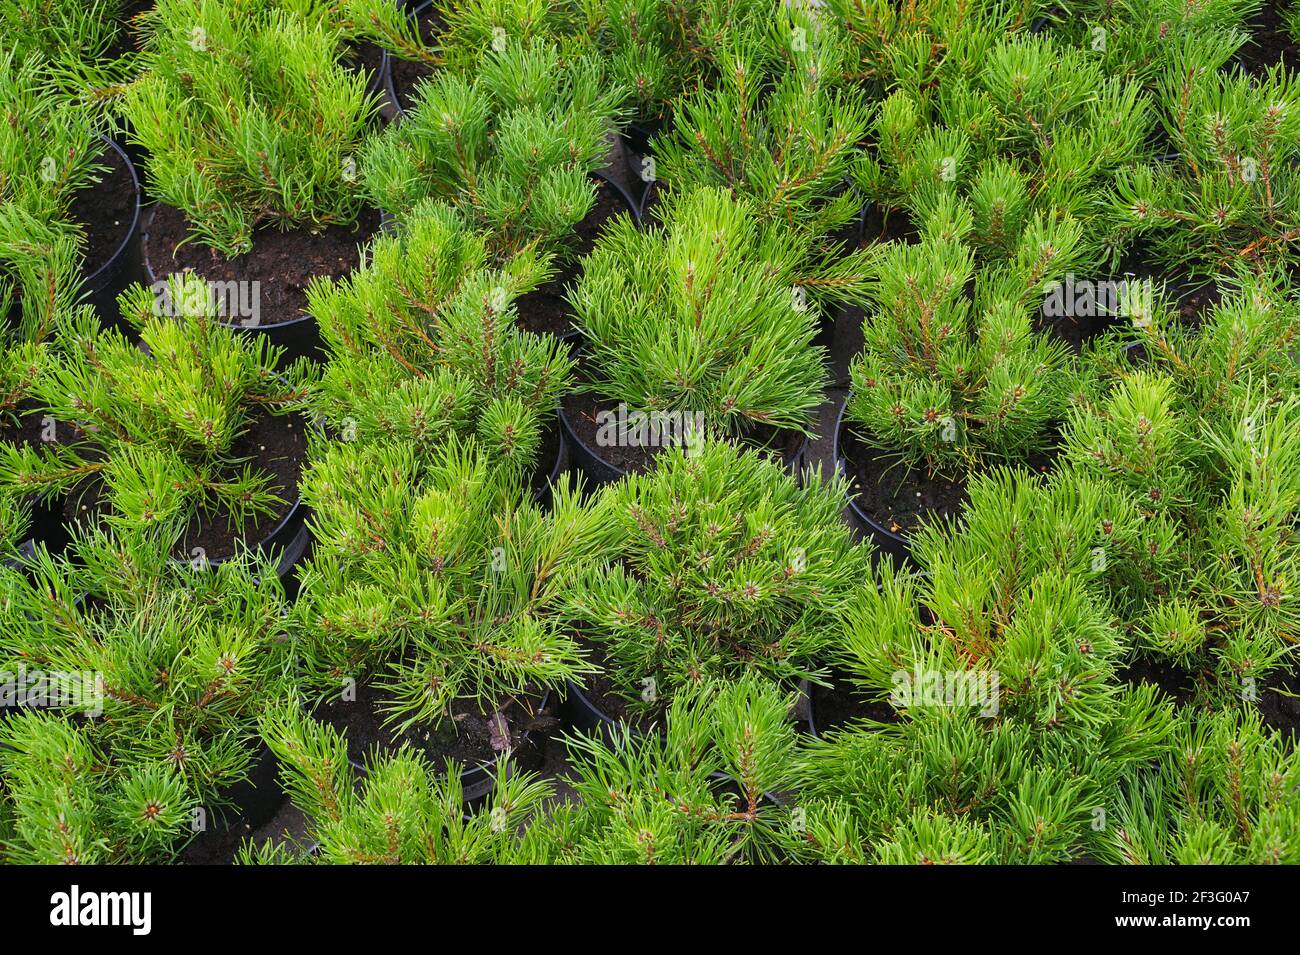 Rows of pots with small conifers (Pinus mugo, known as bog pine, creeping pine or dwarf mountain pine. Garden shop. Stock Photo